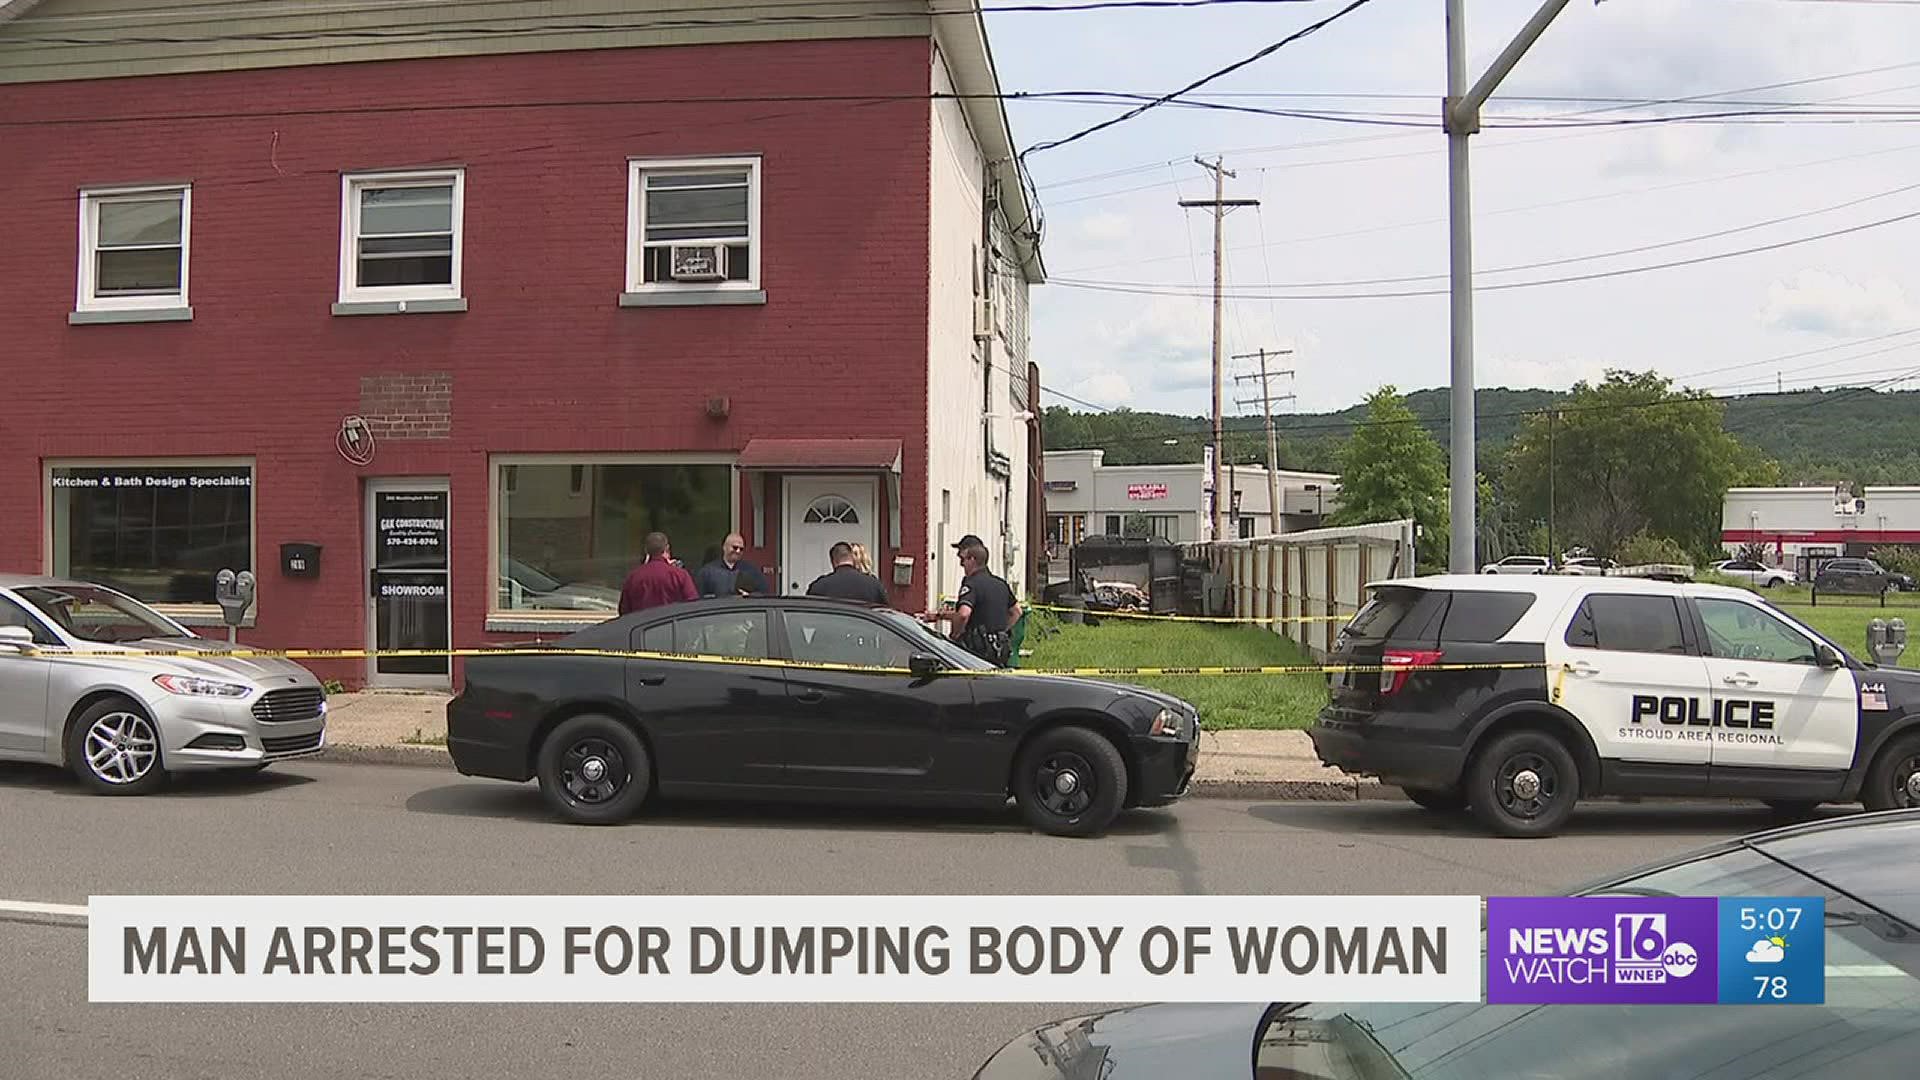 An arrest has been after police have charged a man with dumping a woman's body in a dumpster in Monroe County.